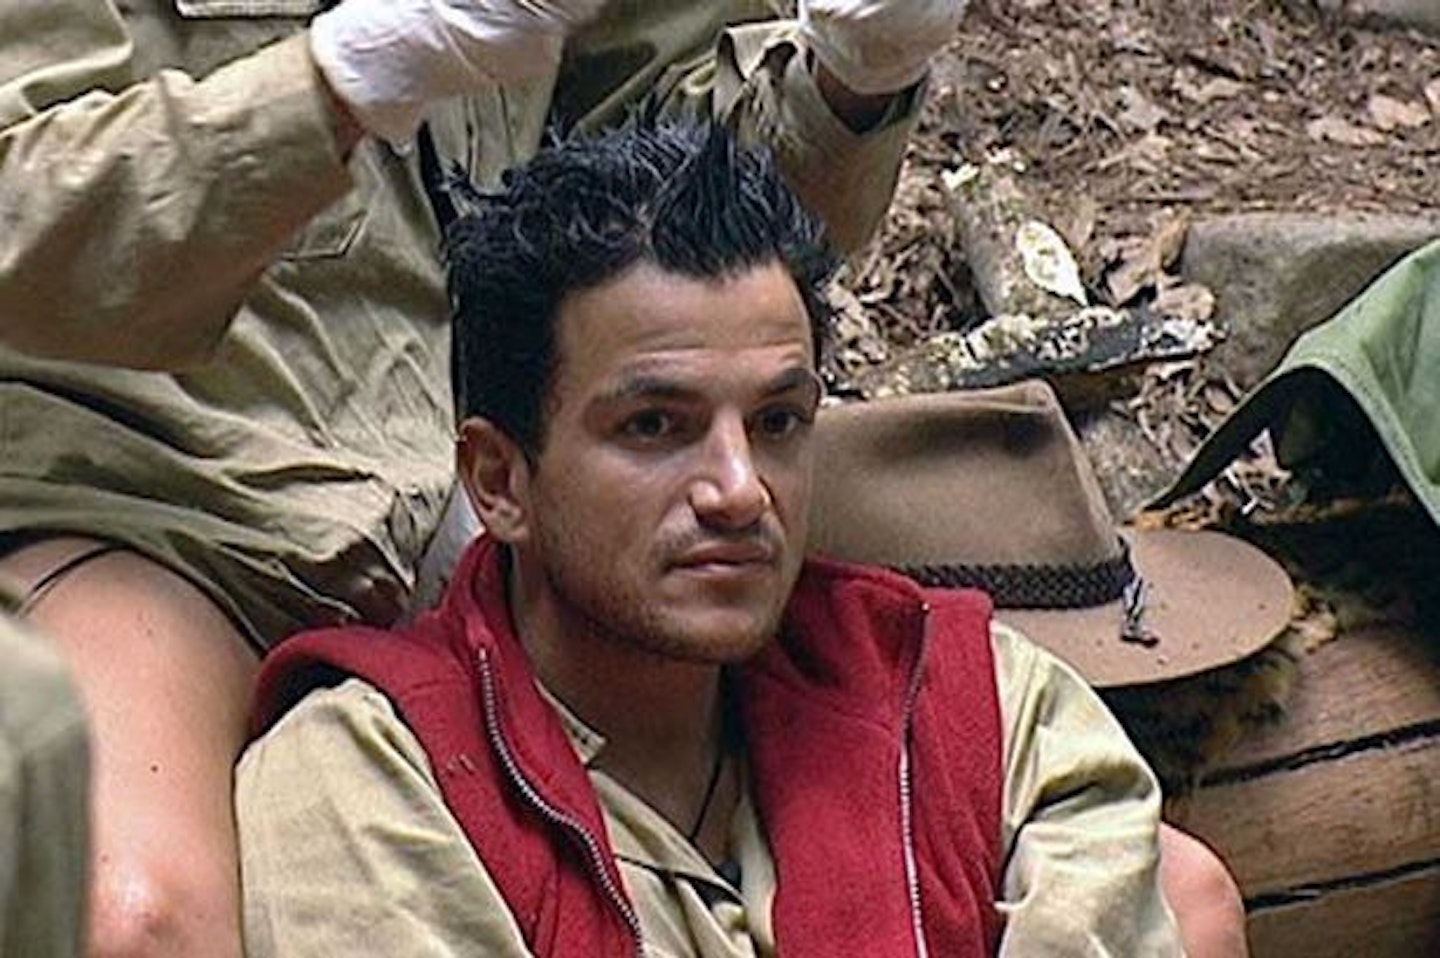 Peter Andre I'm A Celebrity contestants